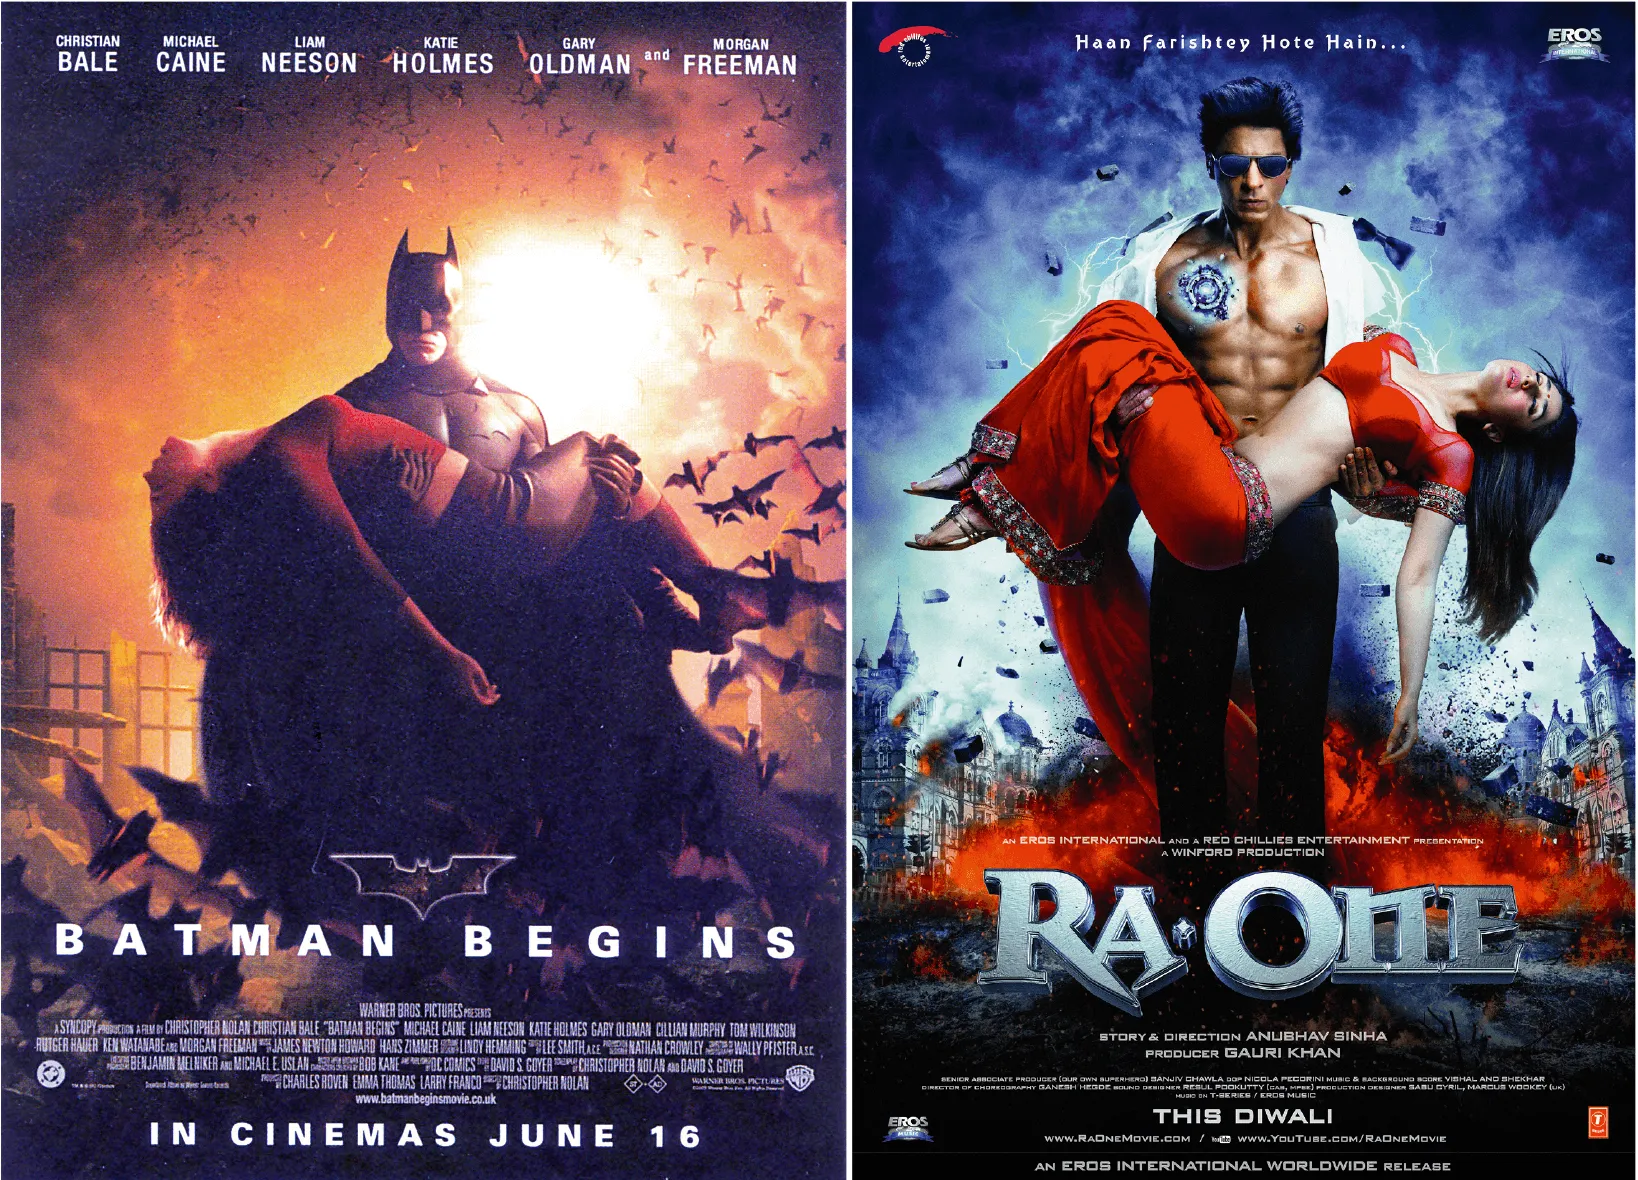 Hollywood and Bollywood twin movie posters: Batman Begins, by Christopher Nolan 2005  and Ra One, by Anubhav Sinha, 2011